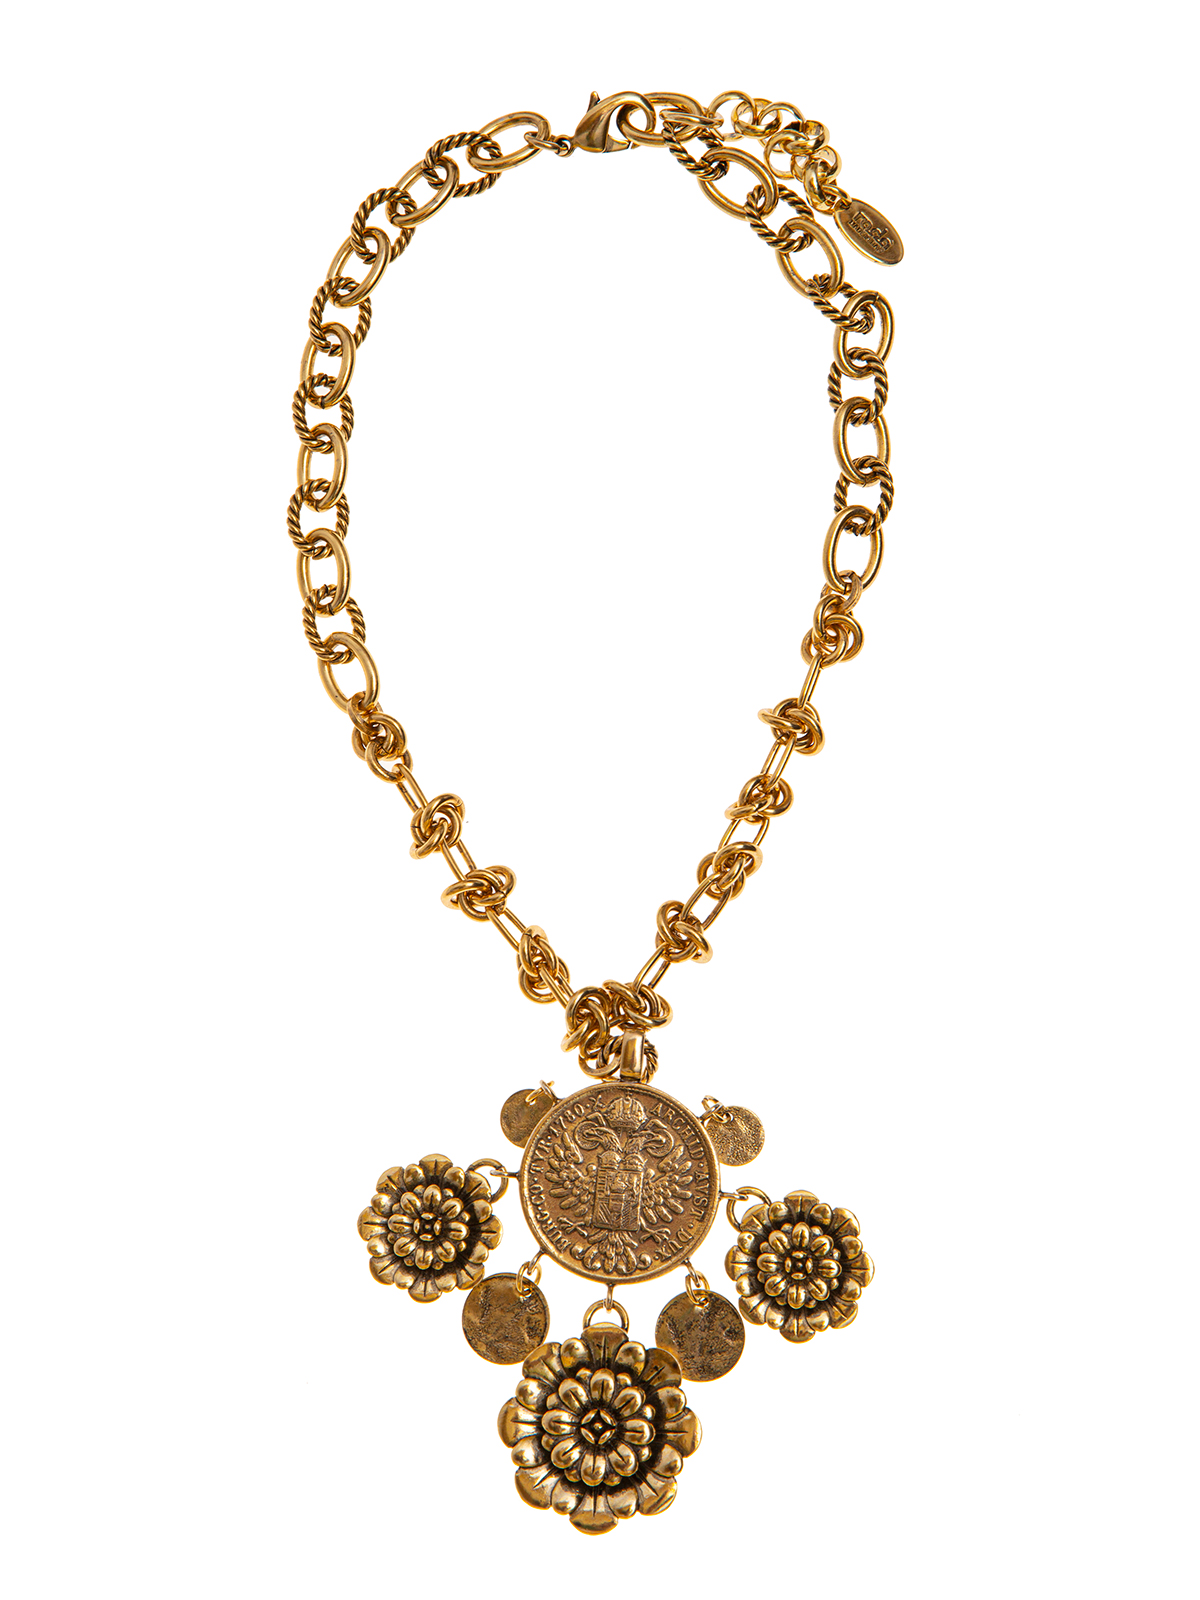 Mixed chain necklace with coin and flowers pendant